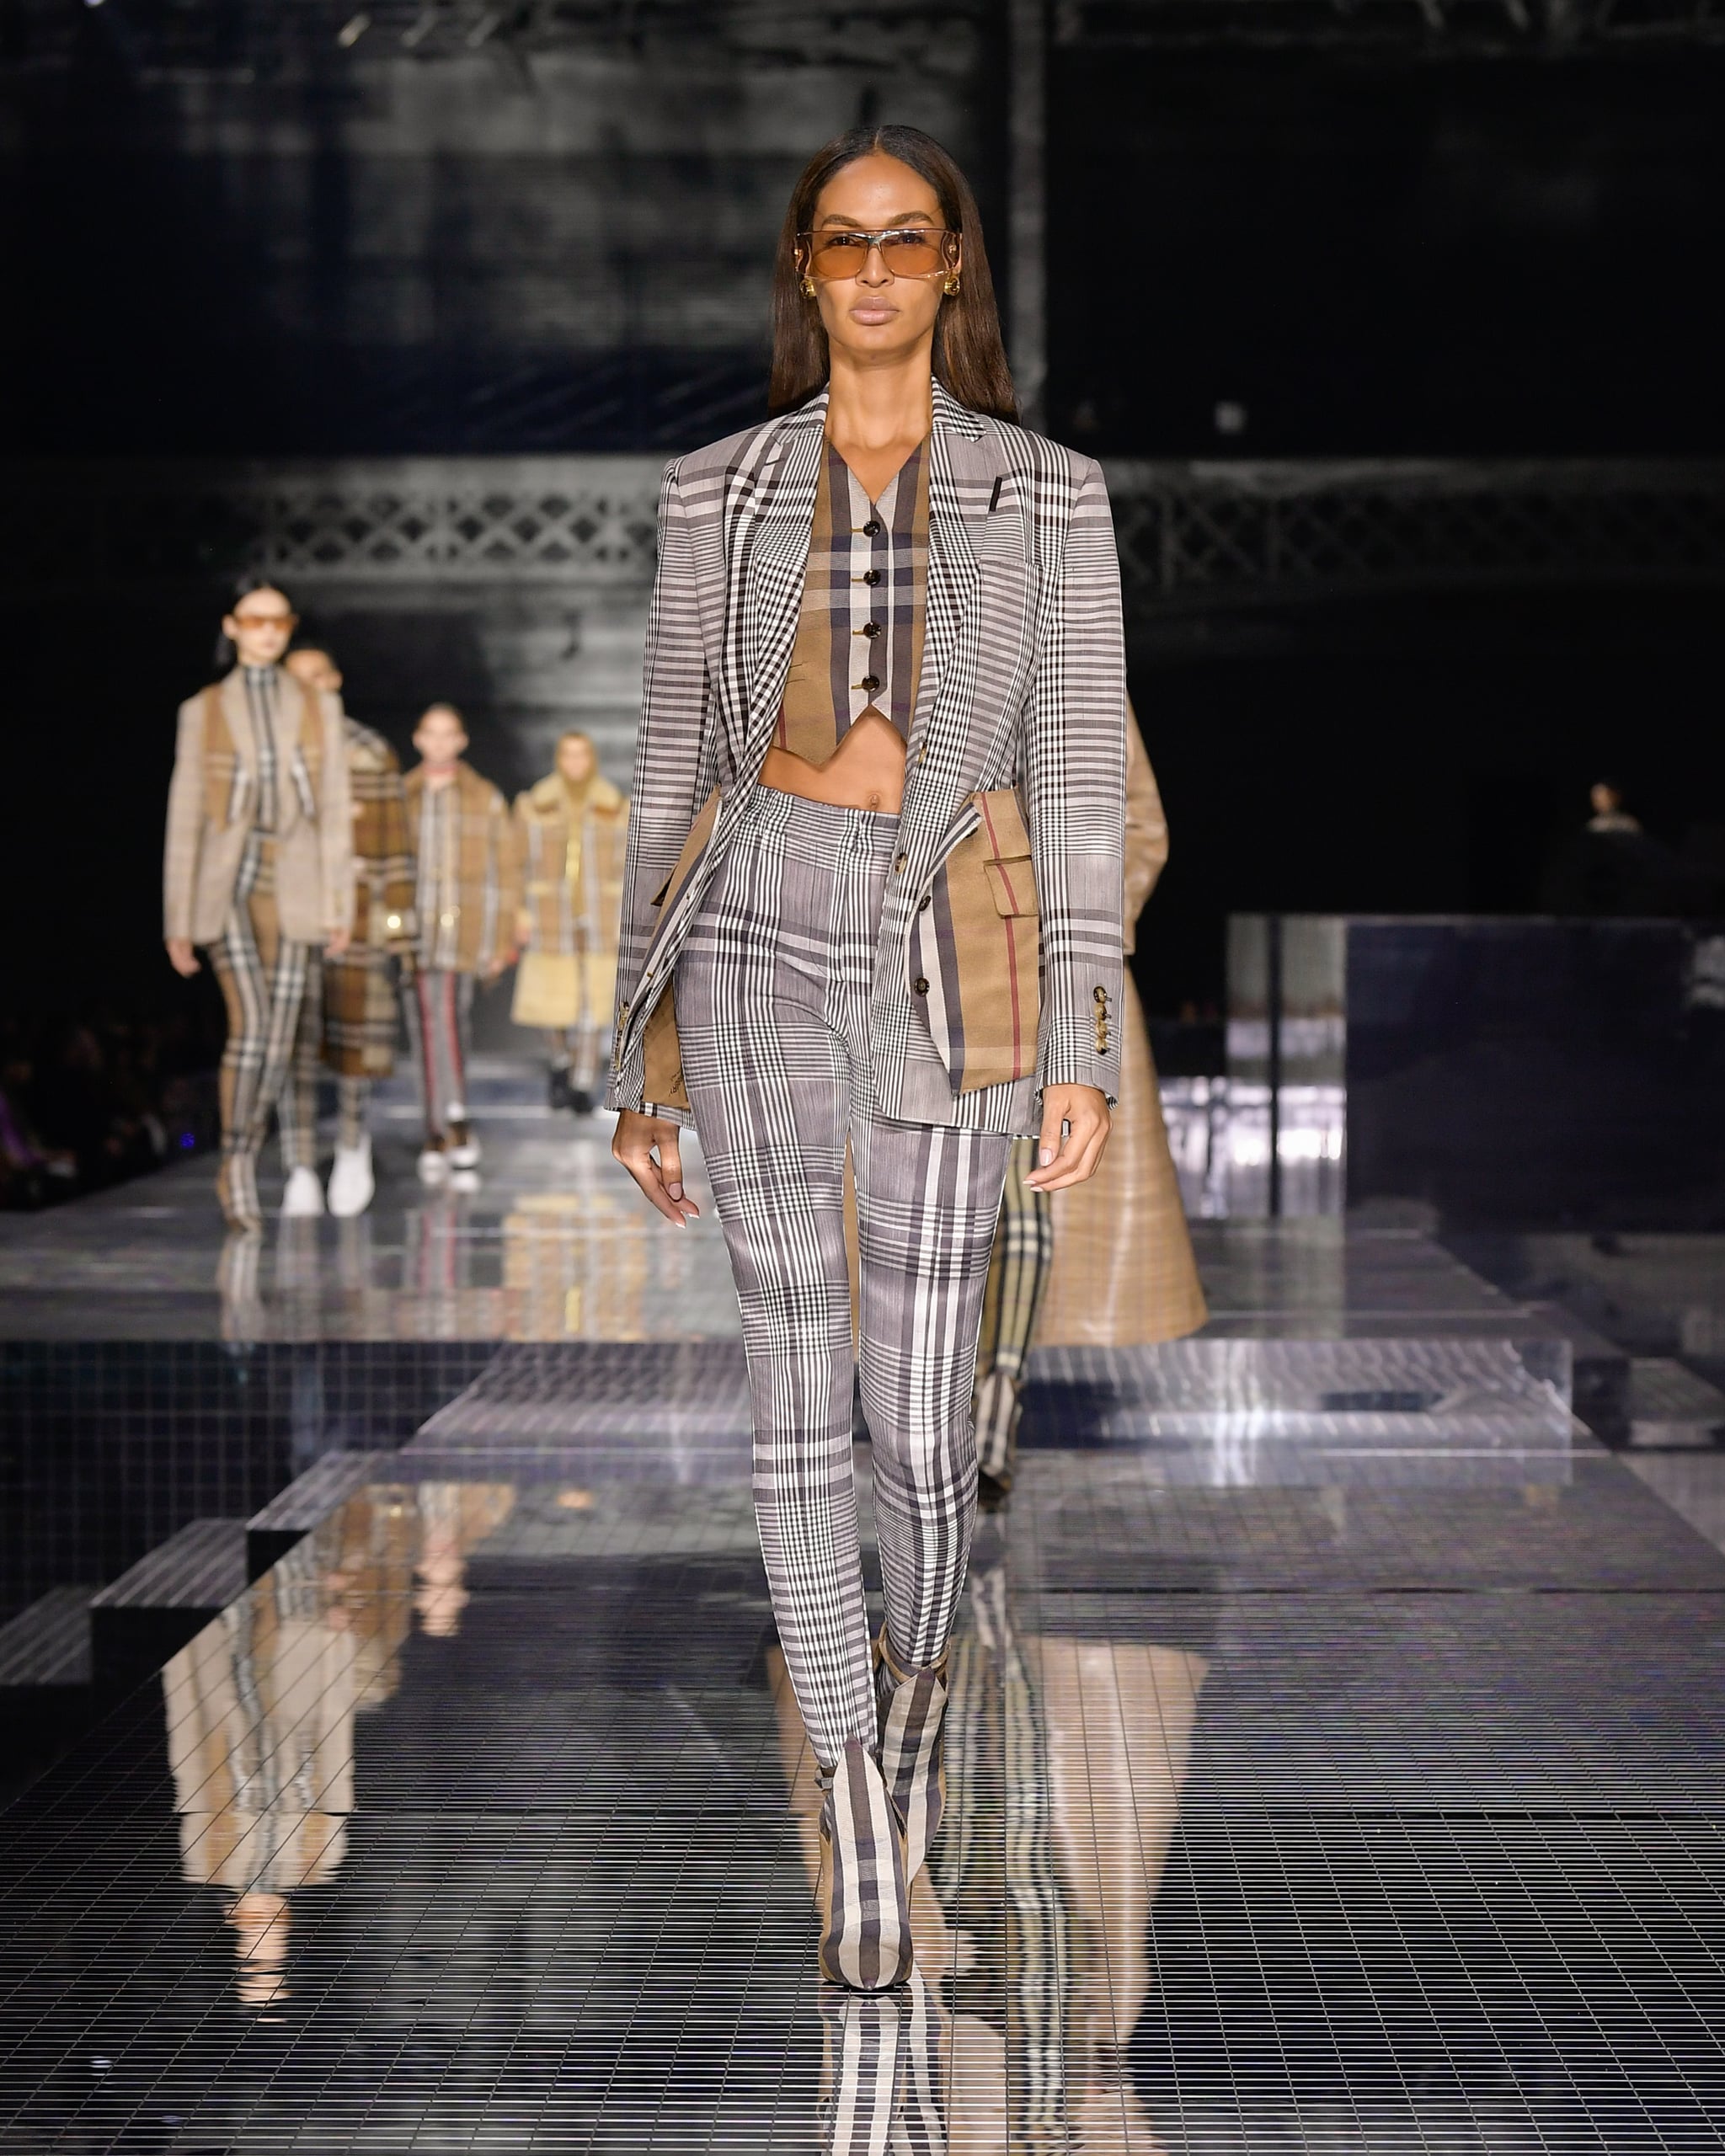 Op risico Gemarkeerd Tulpen Burberry Fall/Winter 2020 | Burberry's Fall 2020 Collection Gives a Sexy  New Take on the Brand's Heritage Checks | POPSUGAR Fashion Photo 44